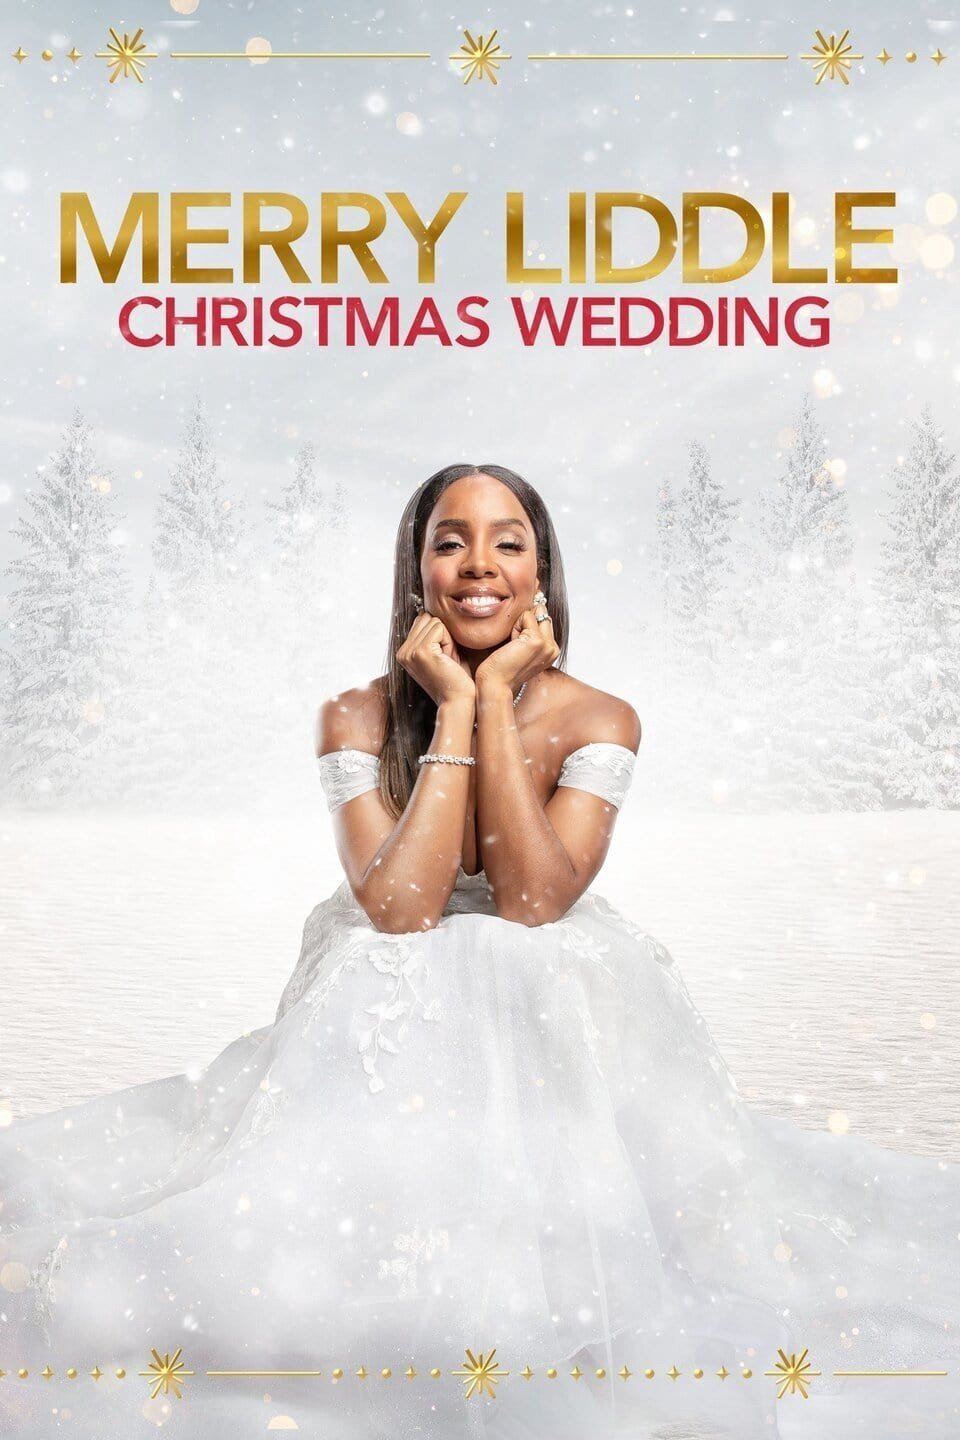 Poster of the movie Merry Liddle Christmas Wedding